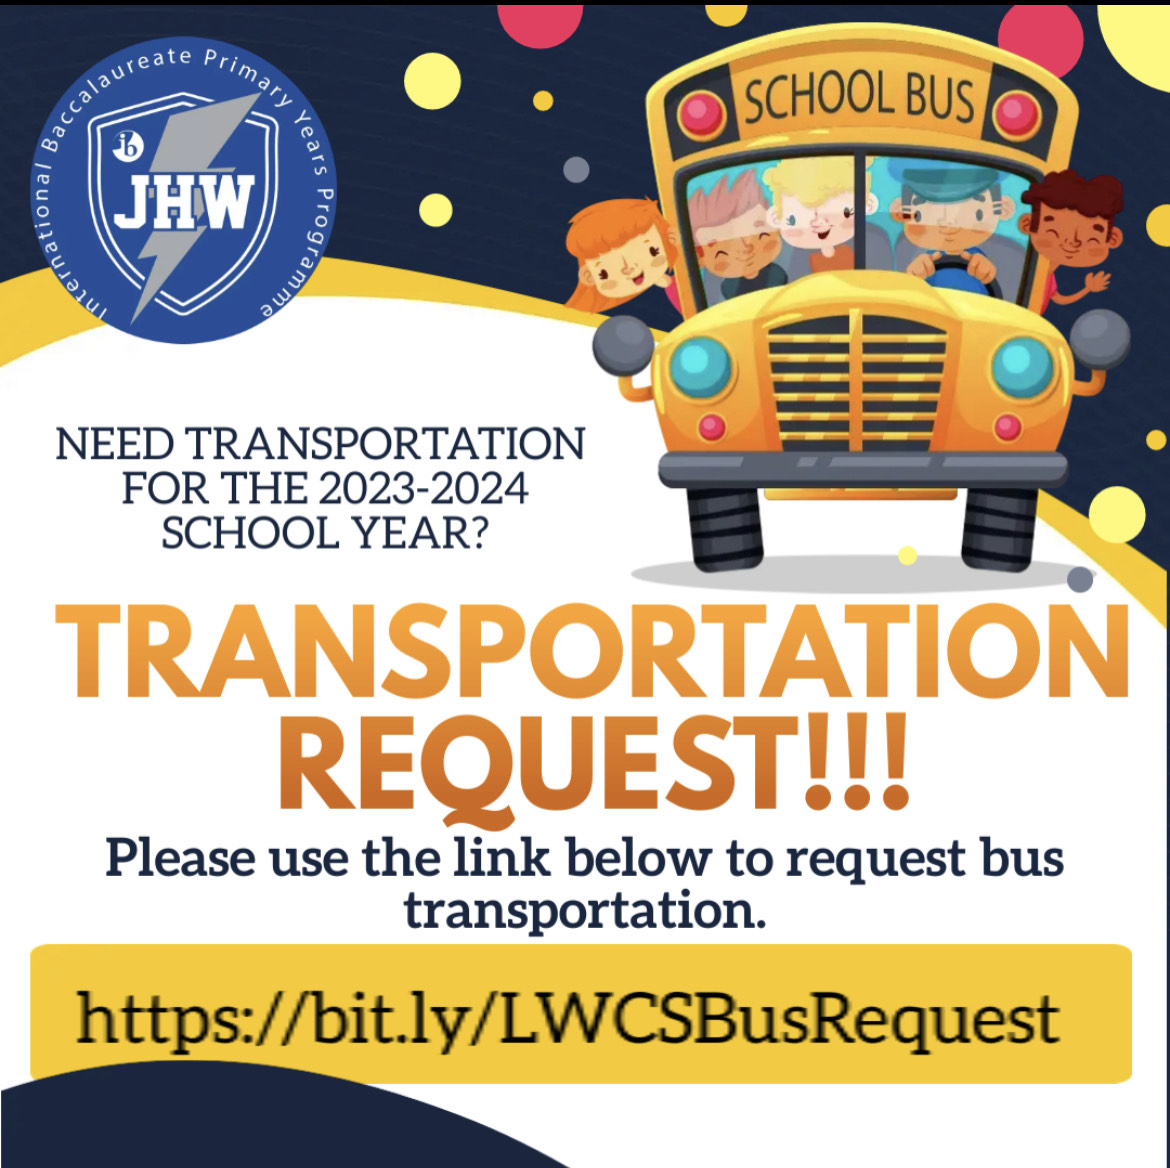 Request transportation for the 2023-24 school year